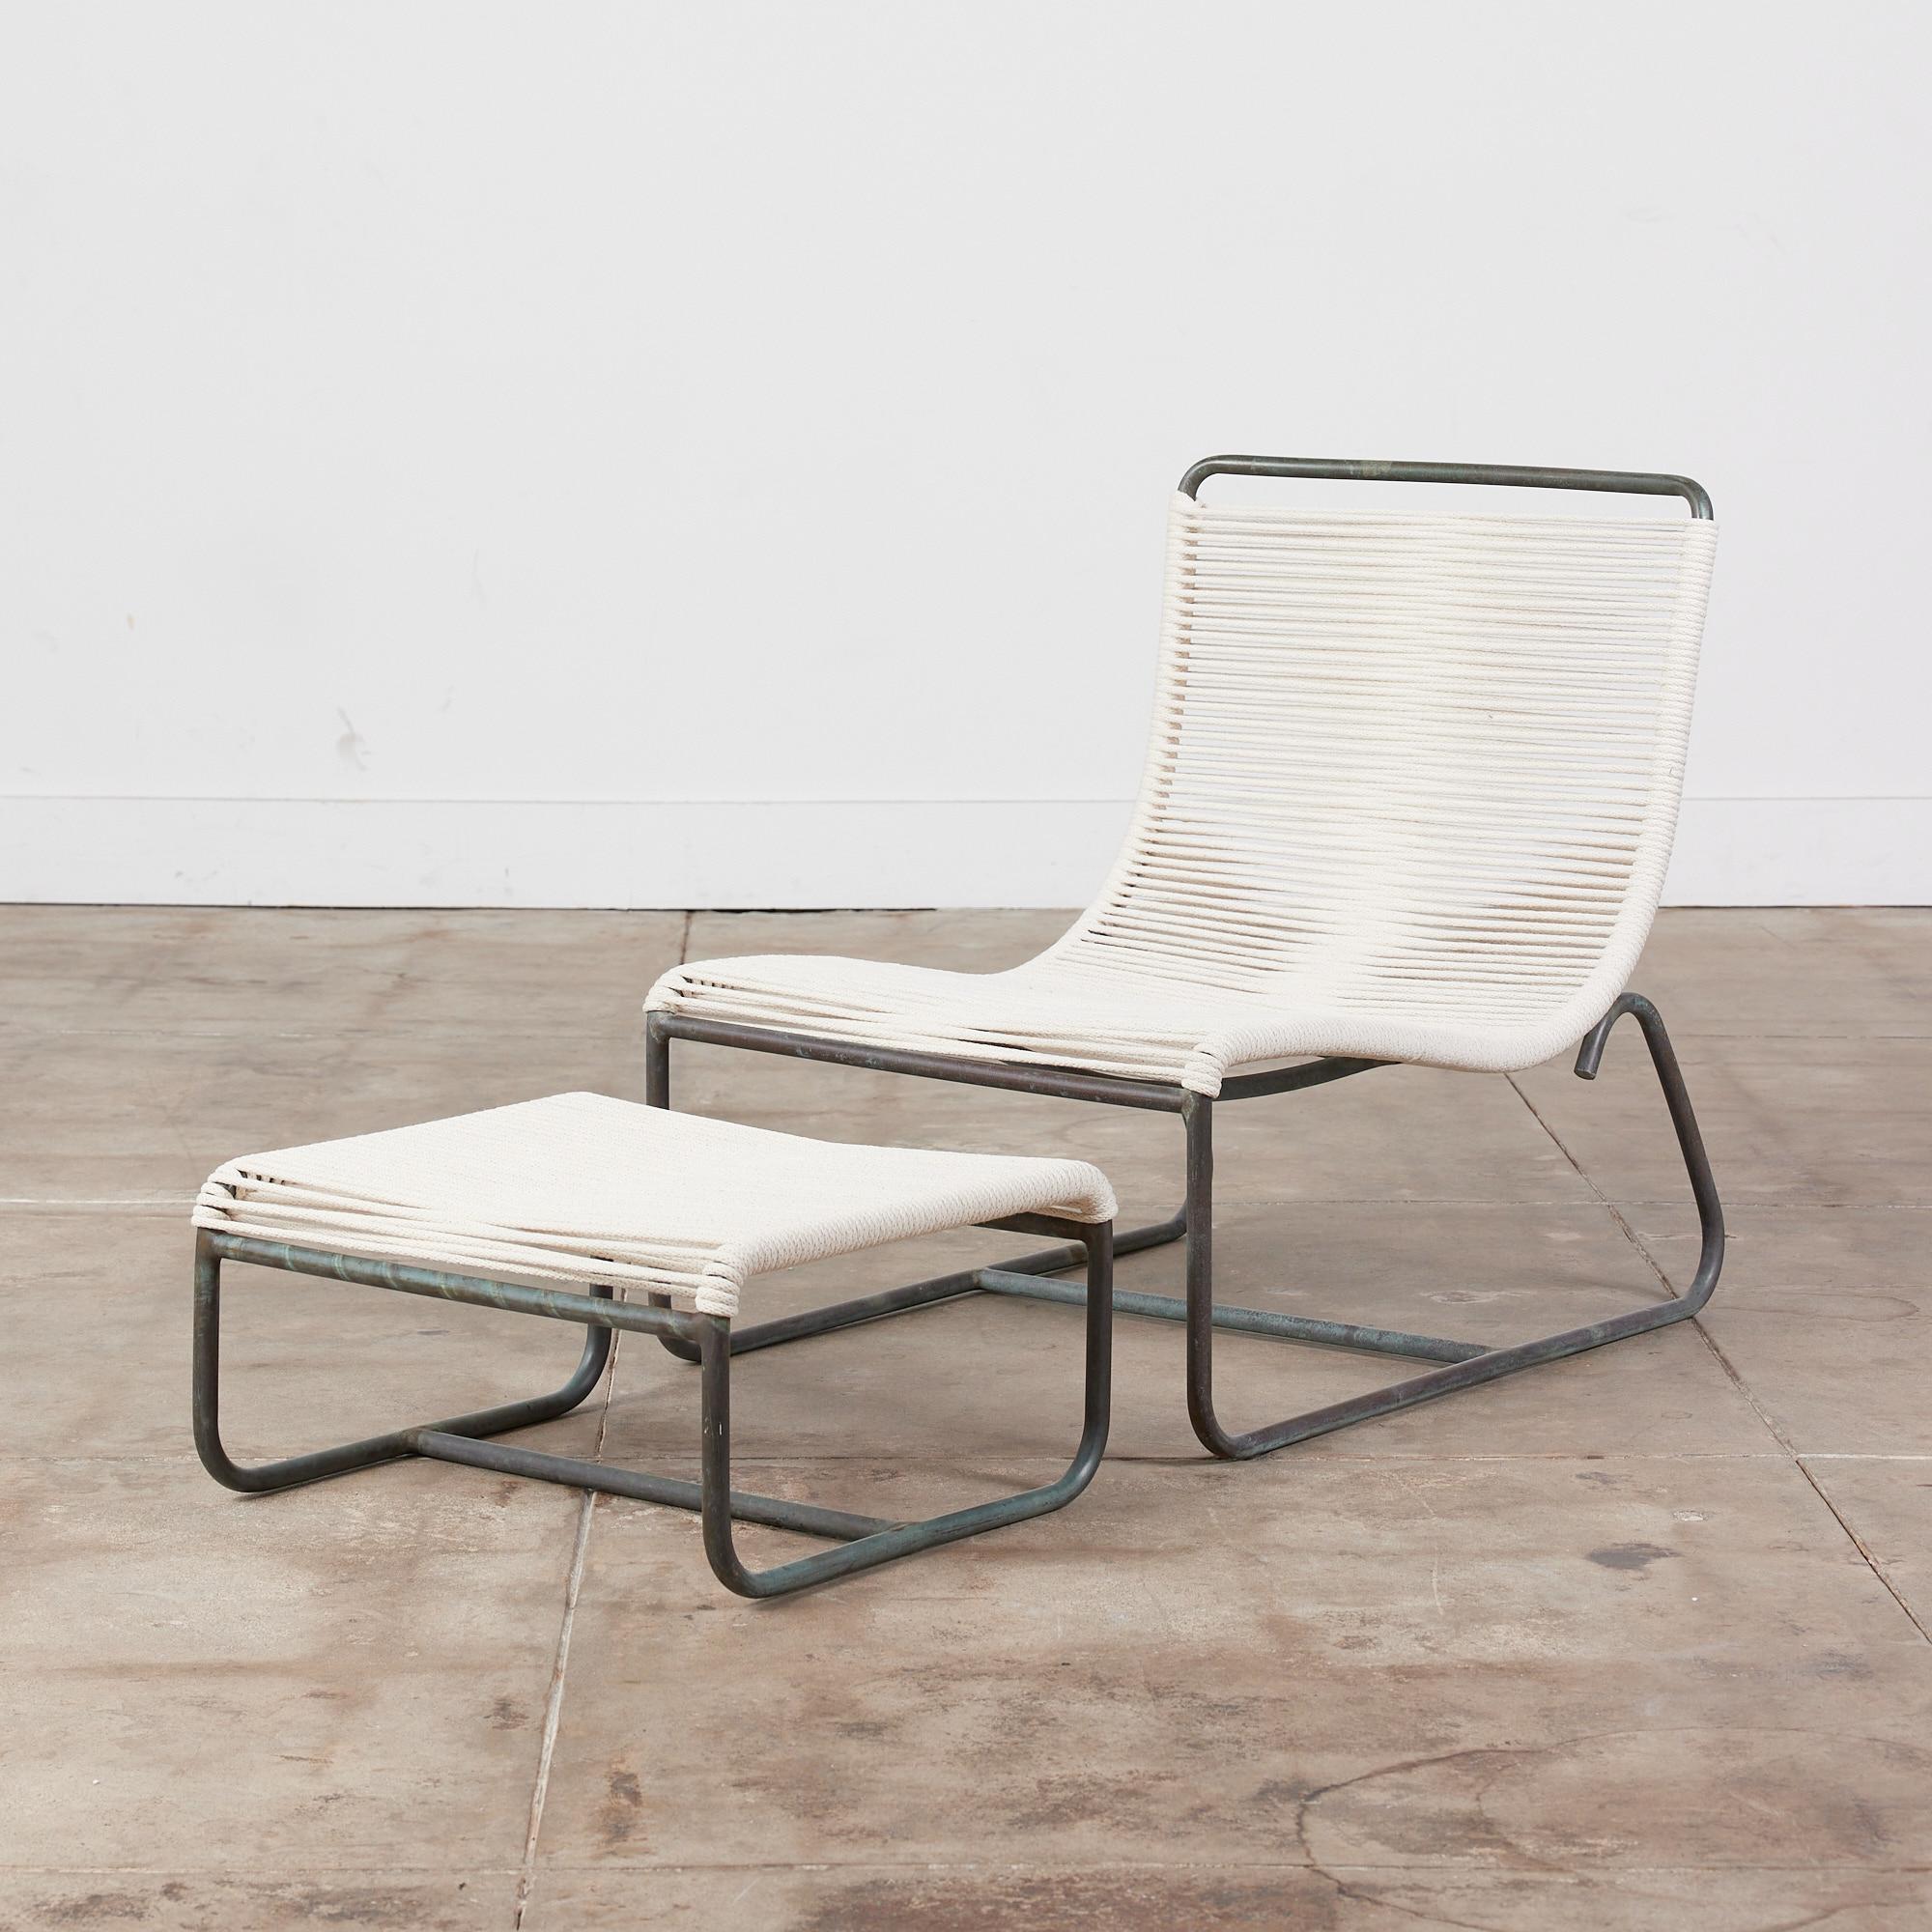 A low lounge chair, known as the “Sleigh Chair,” by Walter Lamb for Brown Jordan. The chair comes with an ottoman that slides beneath the chair seat for easy storage. A continuous length of tubular bronze serves as the frame of a scooped seat, bends